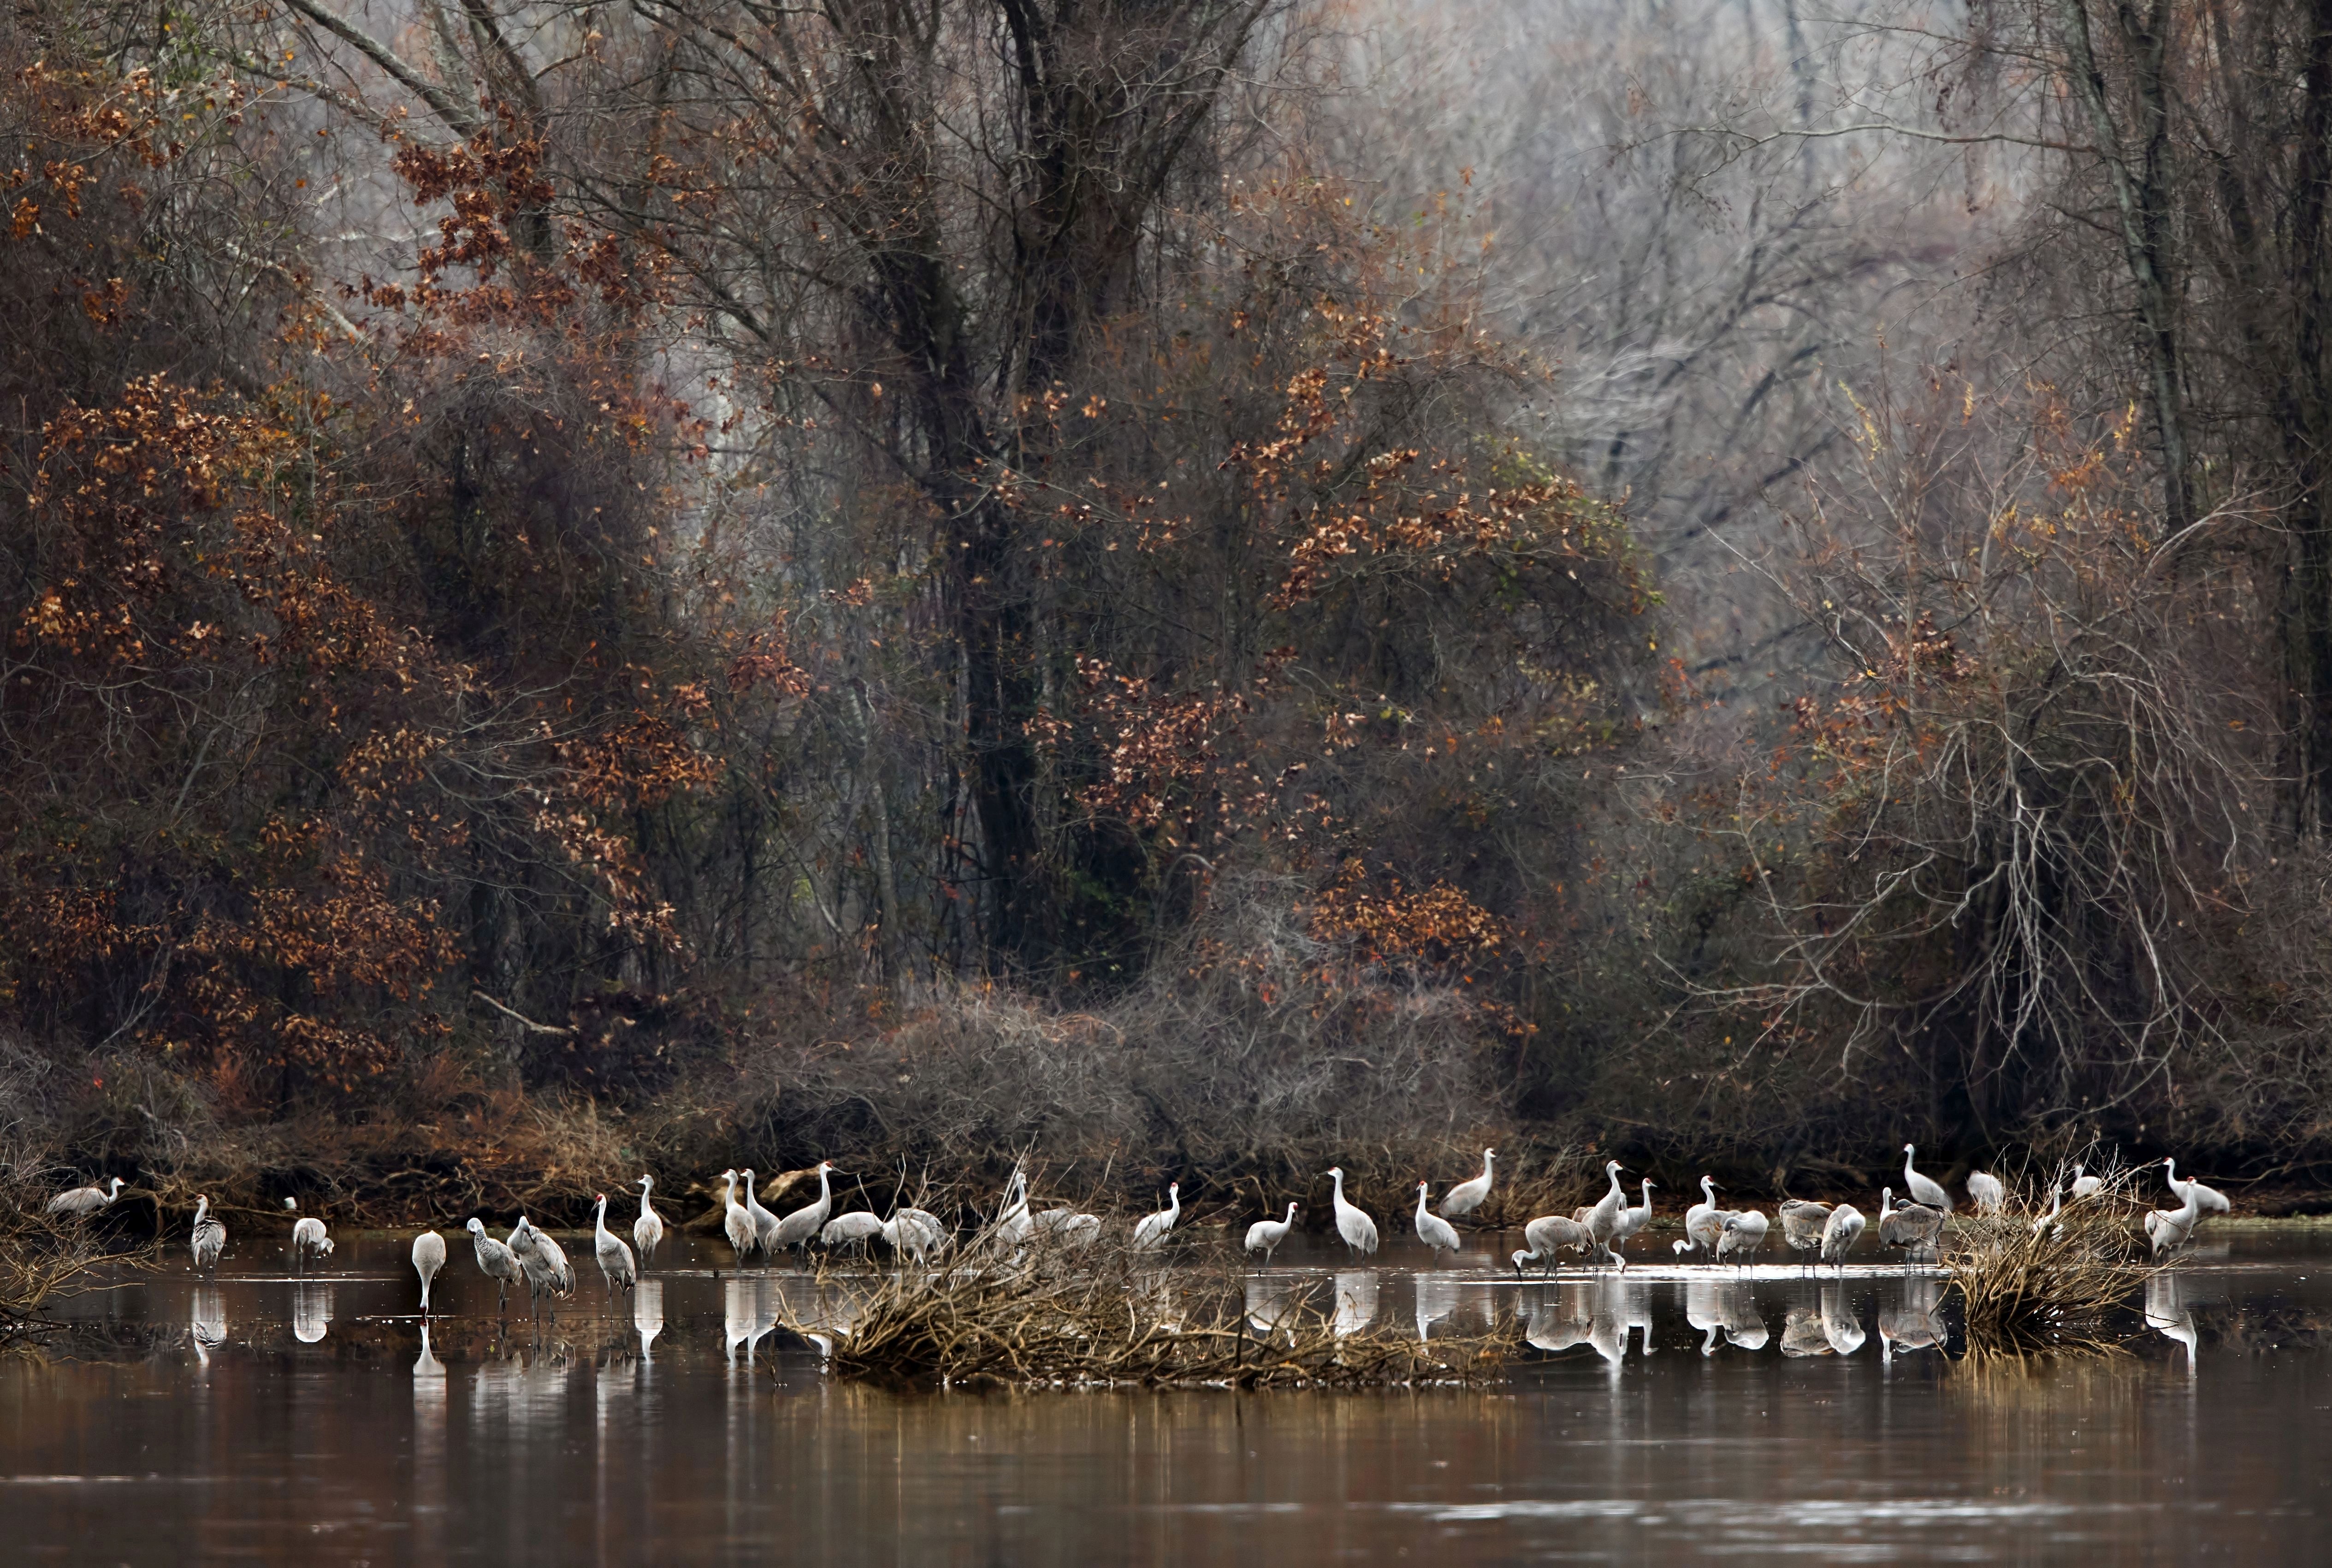 A couple dozen white-ish gray birds standing in shallow water in a forested setting